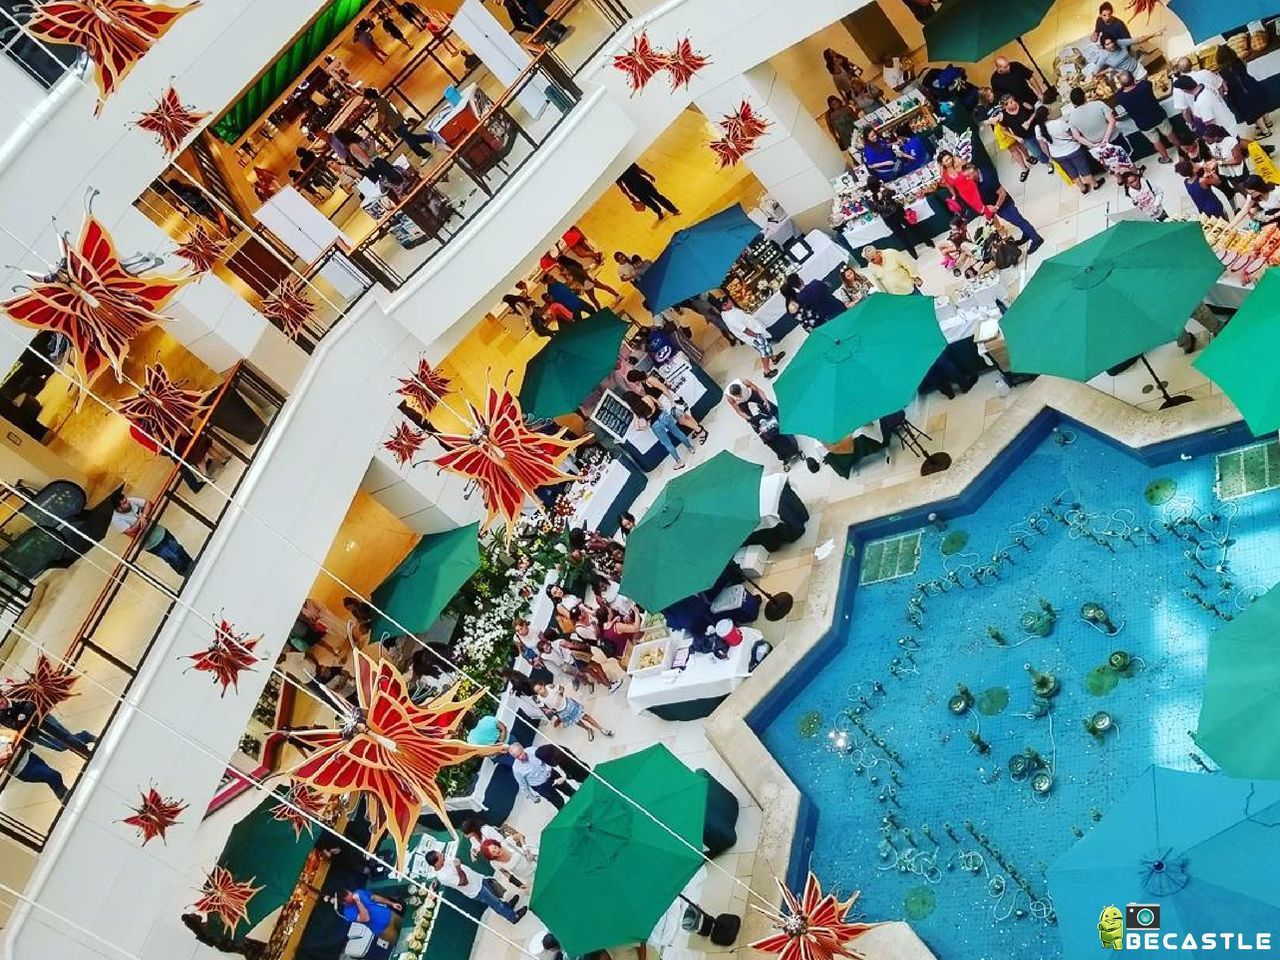 HIGH ANGLE VIEW OF CROWD AT SWIMMING POOL